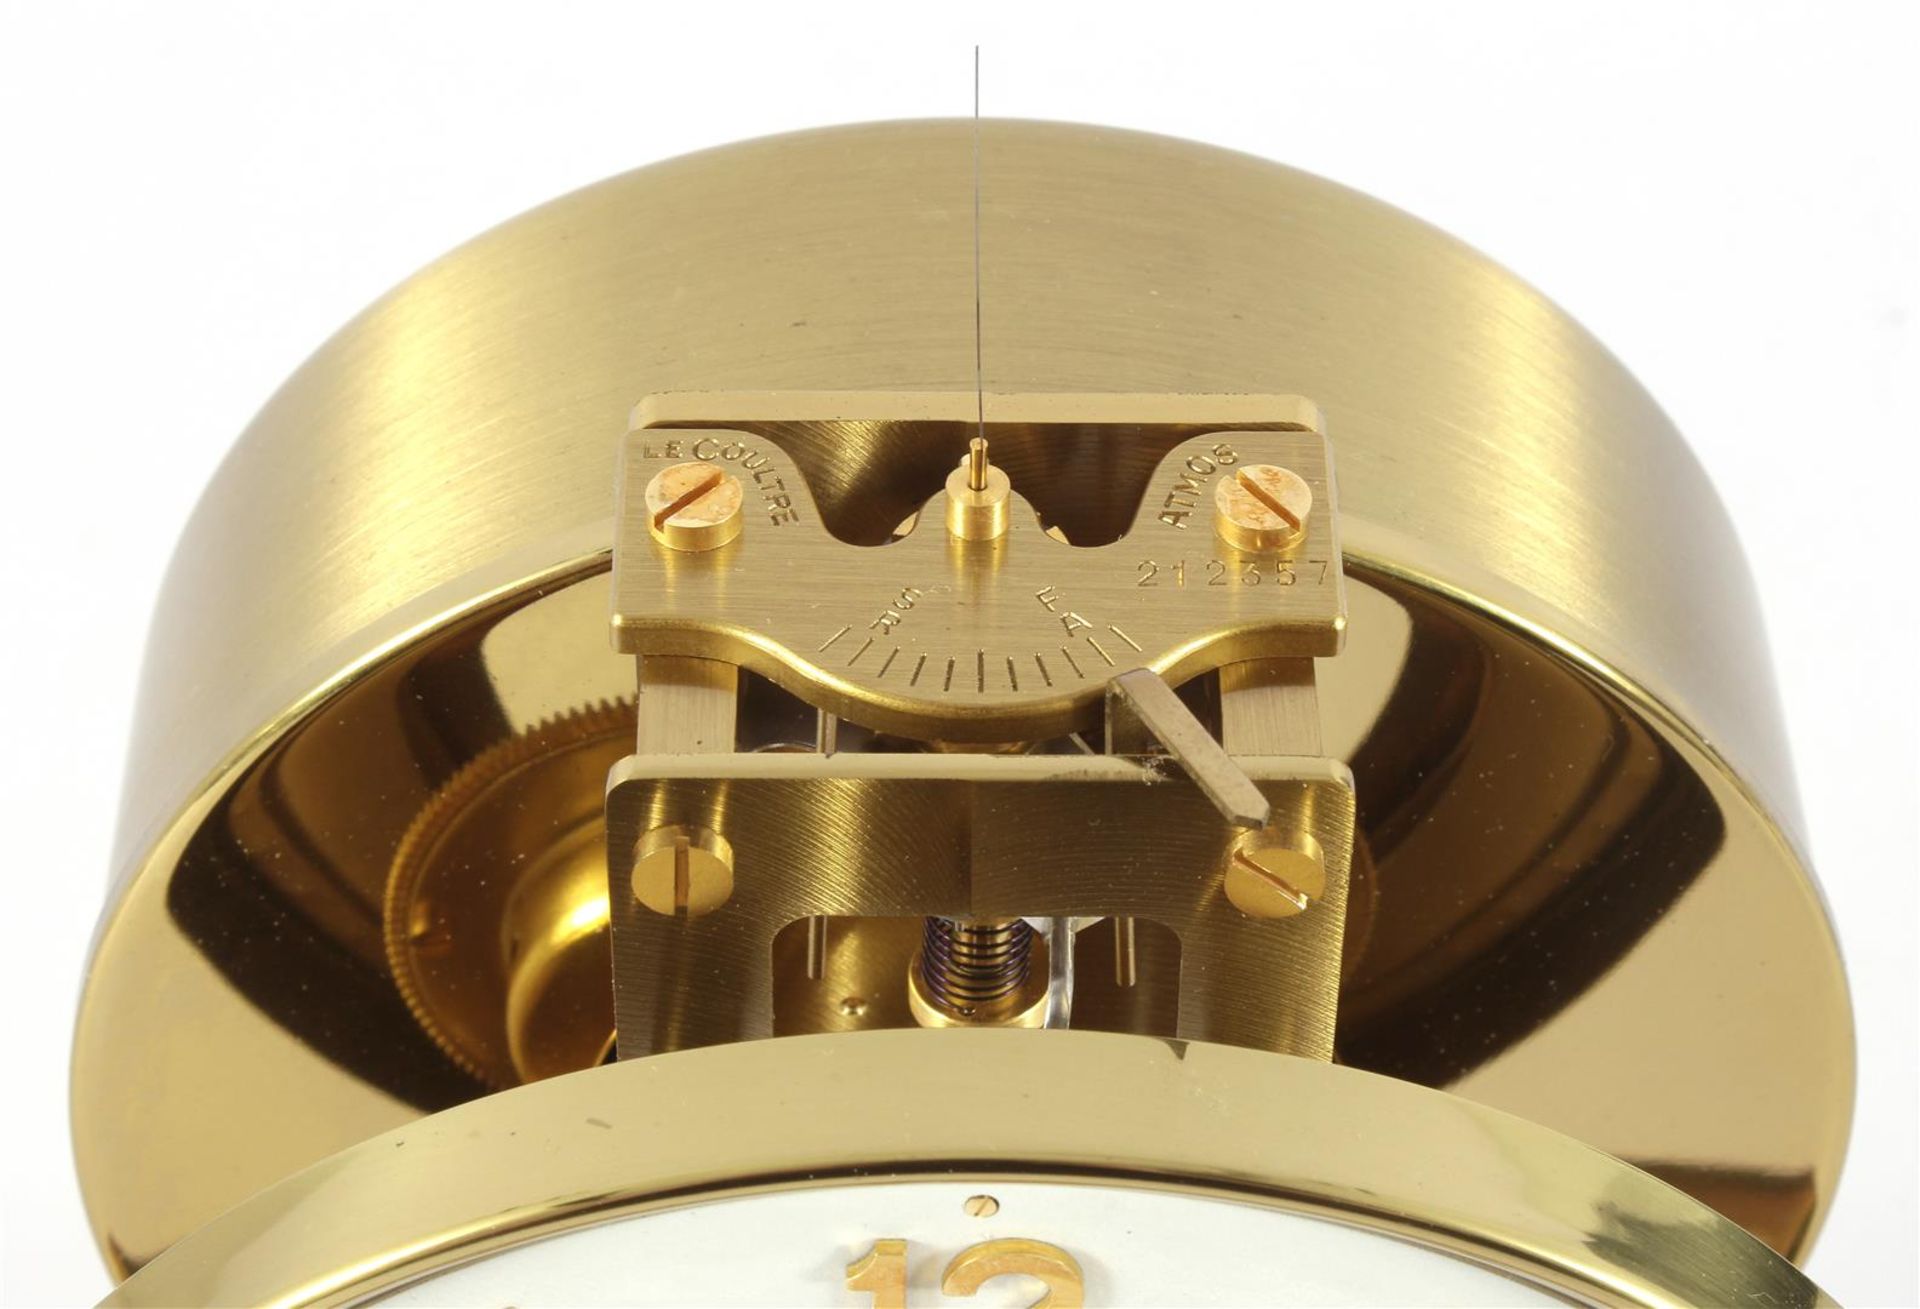 Jaeger and Le Coultre Atmos table clock, timepiece number 212357, late 1960s, 23.5 cm high, 21 cm - Bild 4 aus 4